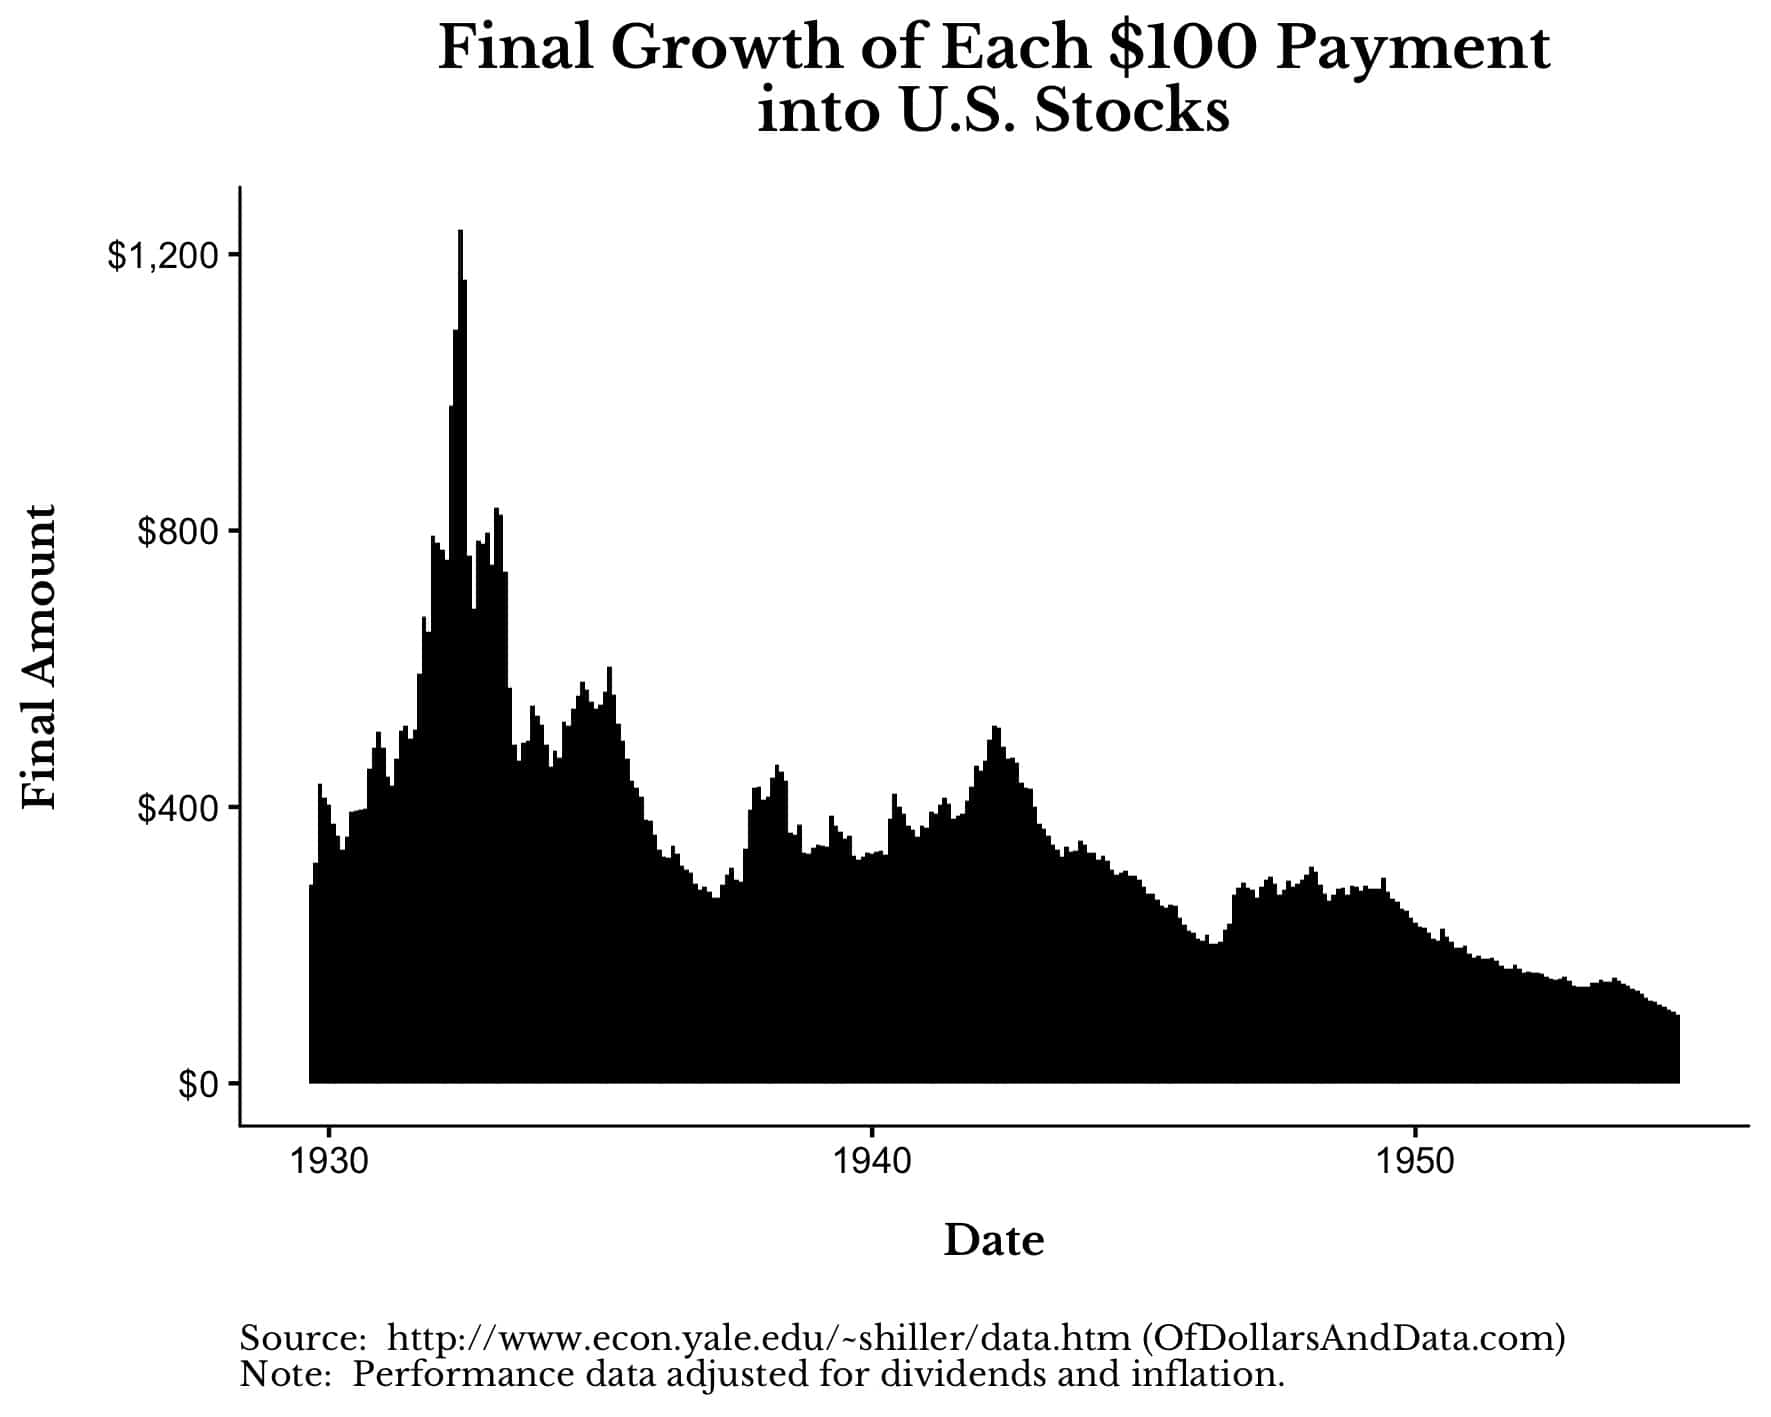 Final growth of each $100 payment into US stocks from 1930 to mid 1950s